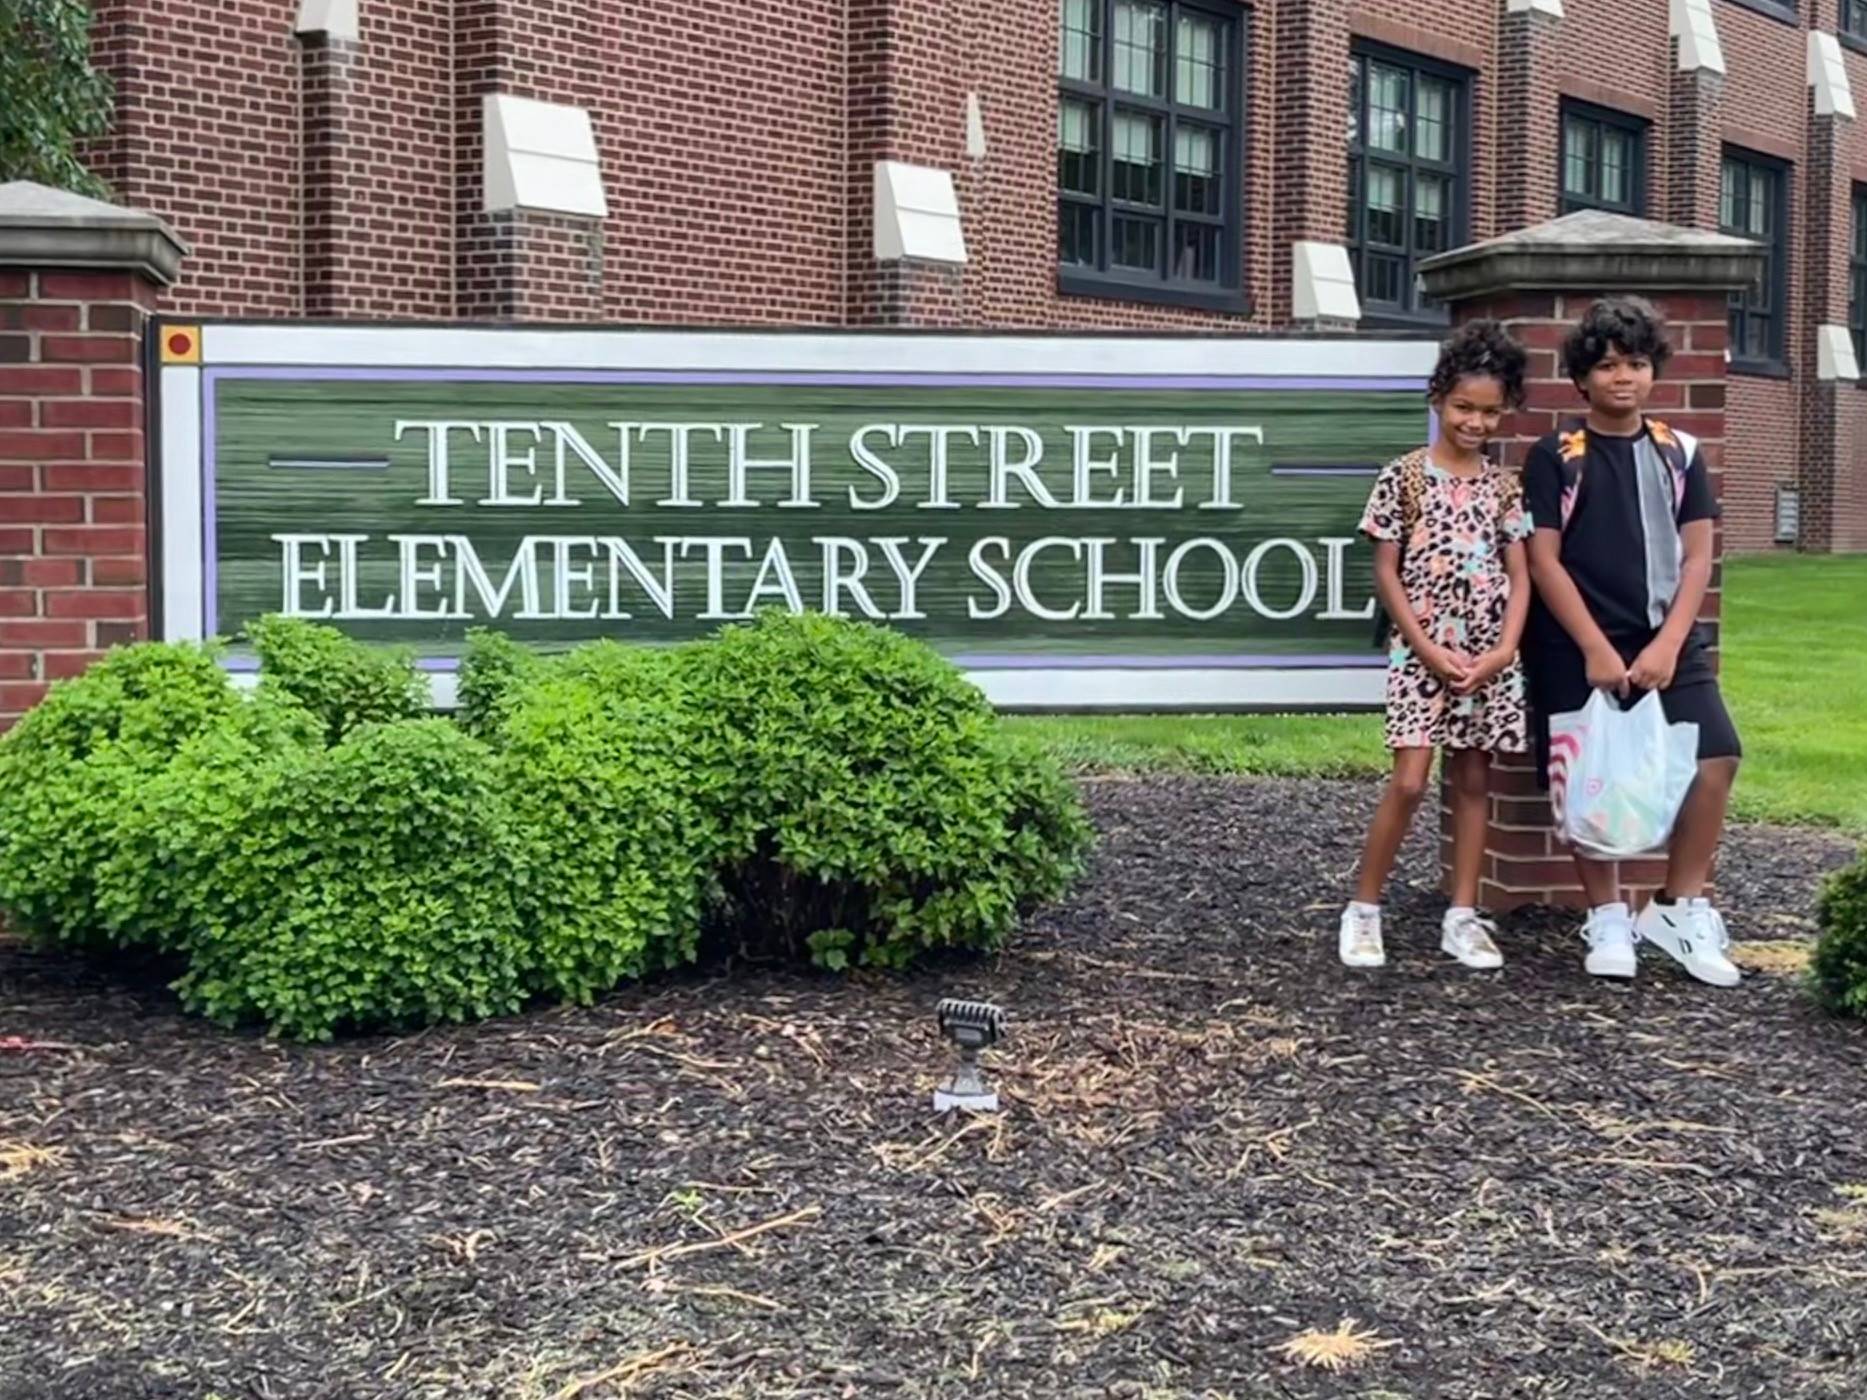 Tenth Street Sign. Students pose for a photo.